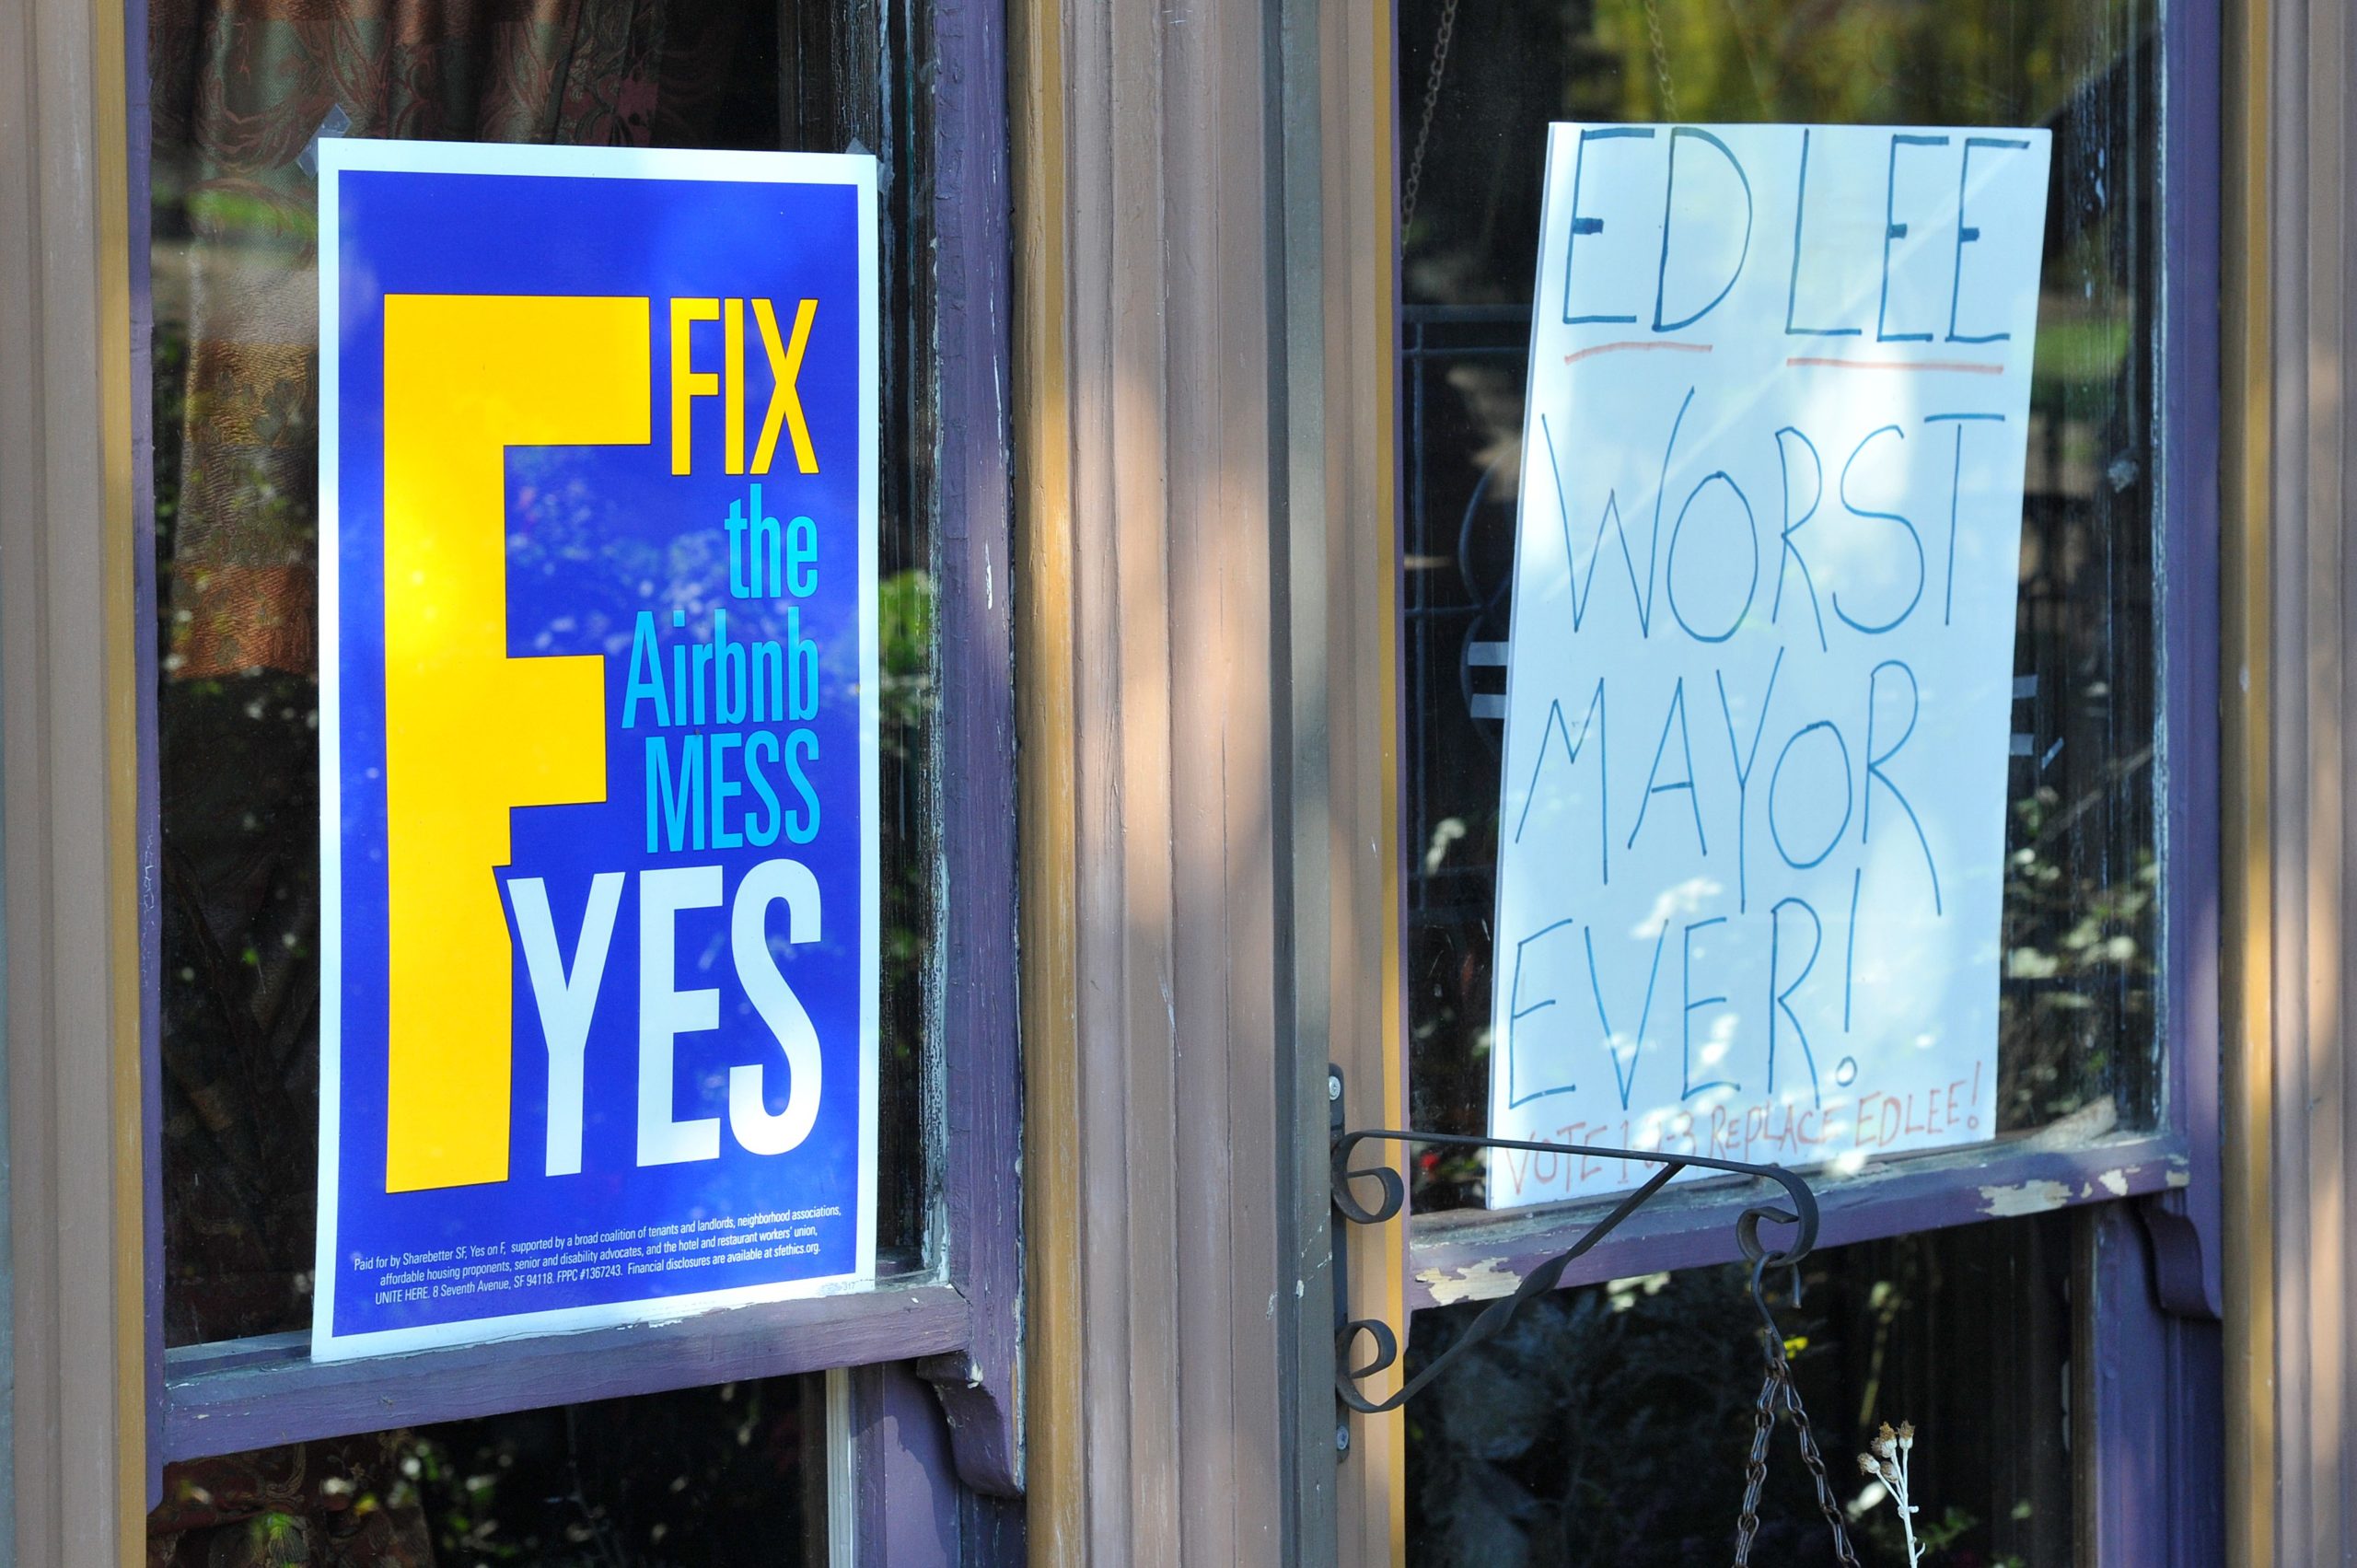 Signs showing support for Proposition F and opposition to San Francisco's current mayor Ed Lee are seen in the window of a home in San Francisco, California on November 3, 2015. Proposition Fknown to some as the Airbnb initiativerestricts short term rentals in the city which some say have contributed to skyrocketing rental rates. (Josh Edelson/AFP via Getty Images)